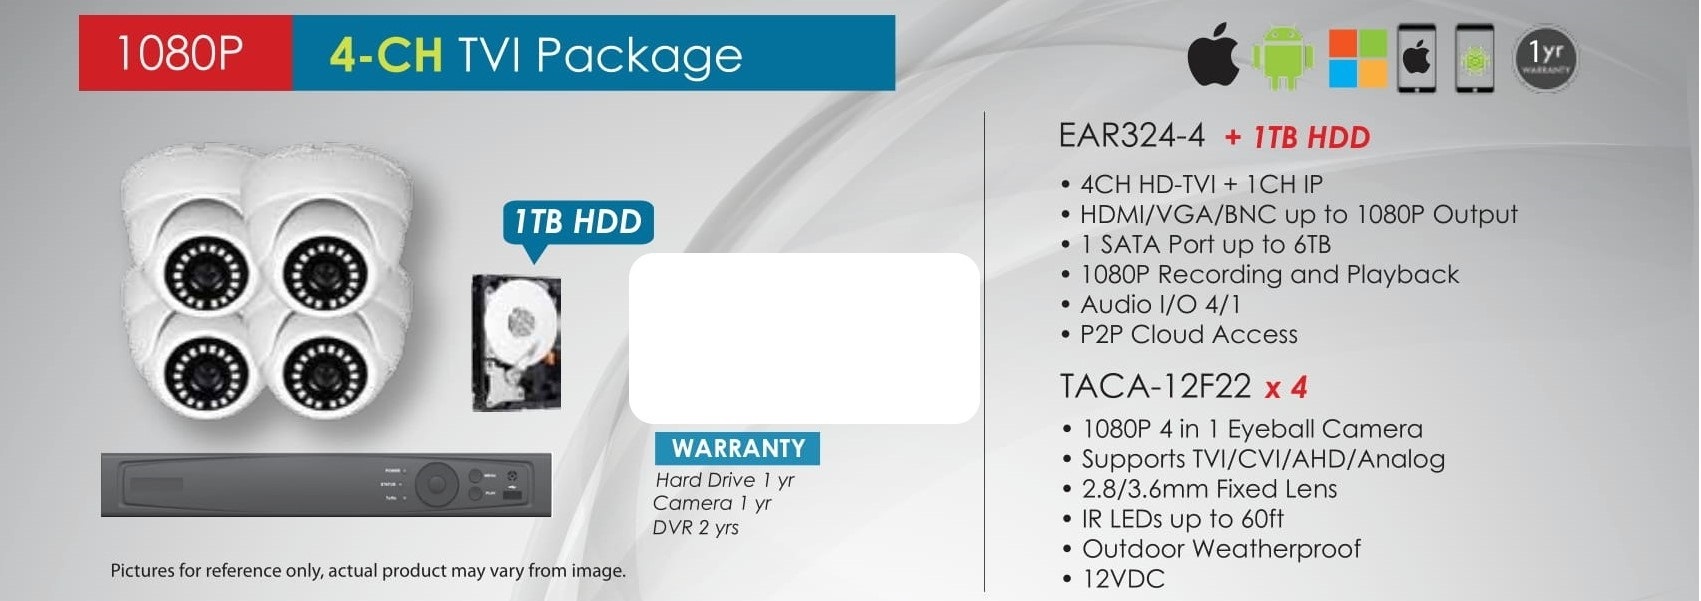 1080p-4ch-pack-1 New Packages - No Price